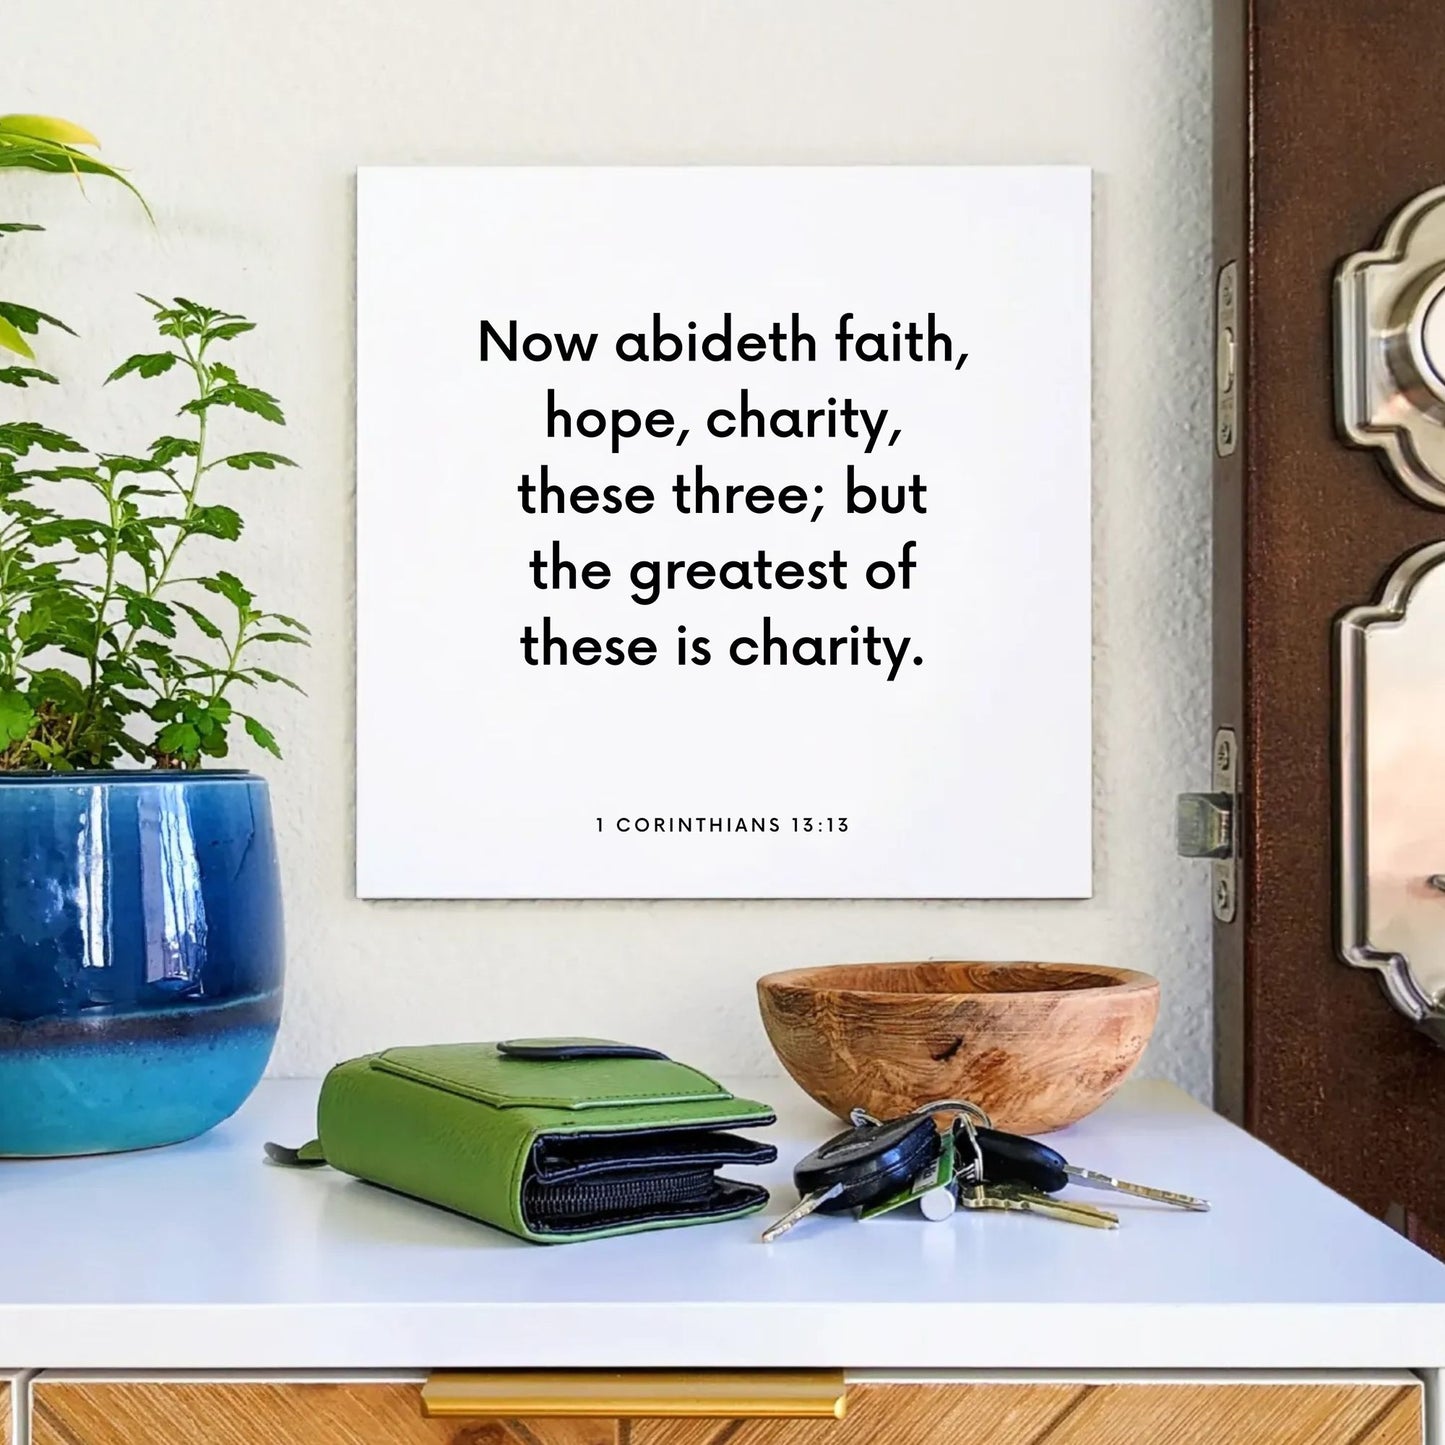 Entryway mouting of the scripture tile for 1 Corinthians 13:13 - "The greatest of these is charity"